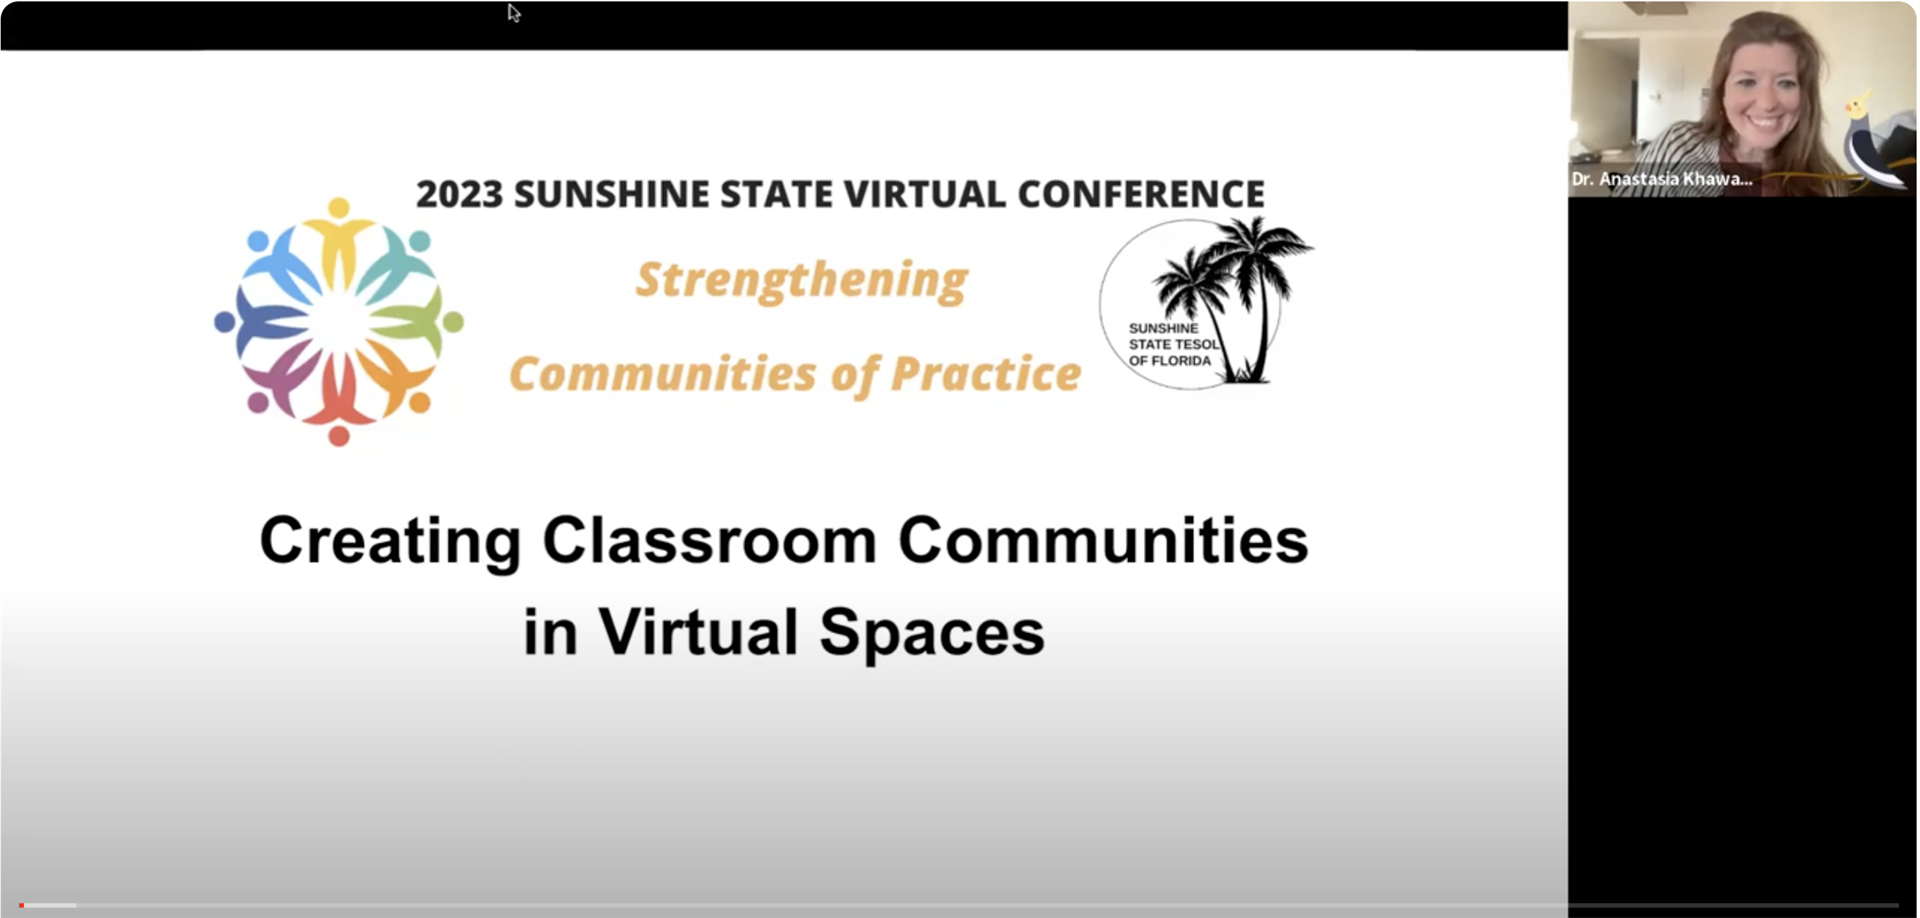 YouTube thumbnail for the 2023 SSTESOL Conference Presentation Creating Classroom Communities in Virtual Spaces.